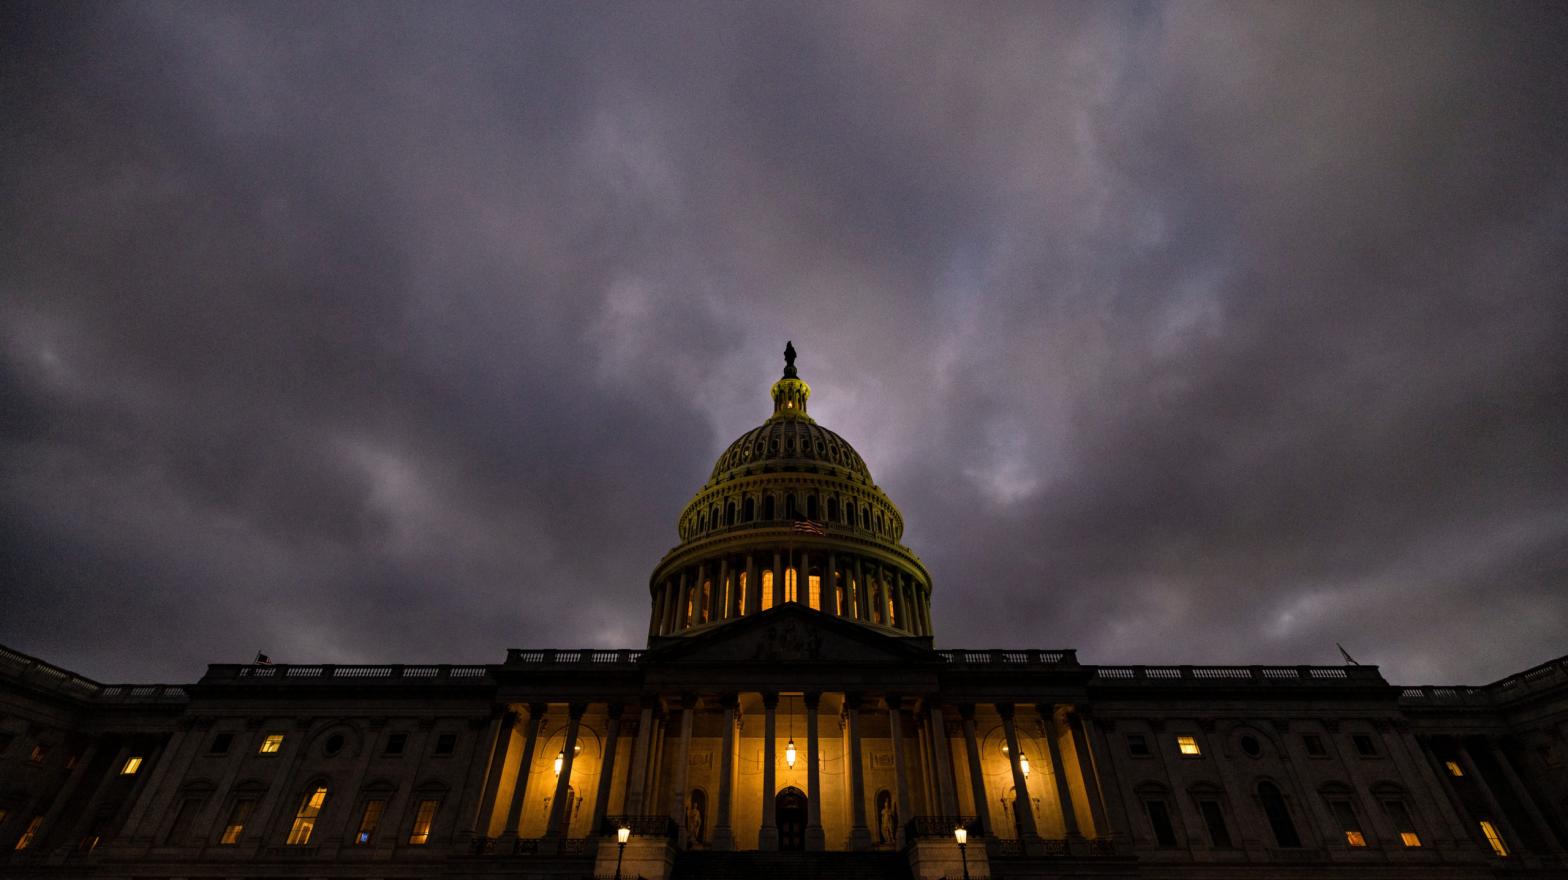 Dusk falls over the US Capitol building on Dec. 20 in Washington, DC. (Photo: Samuel Corum, Getty Images)